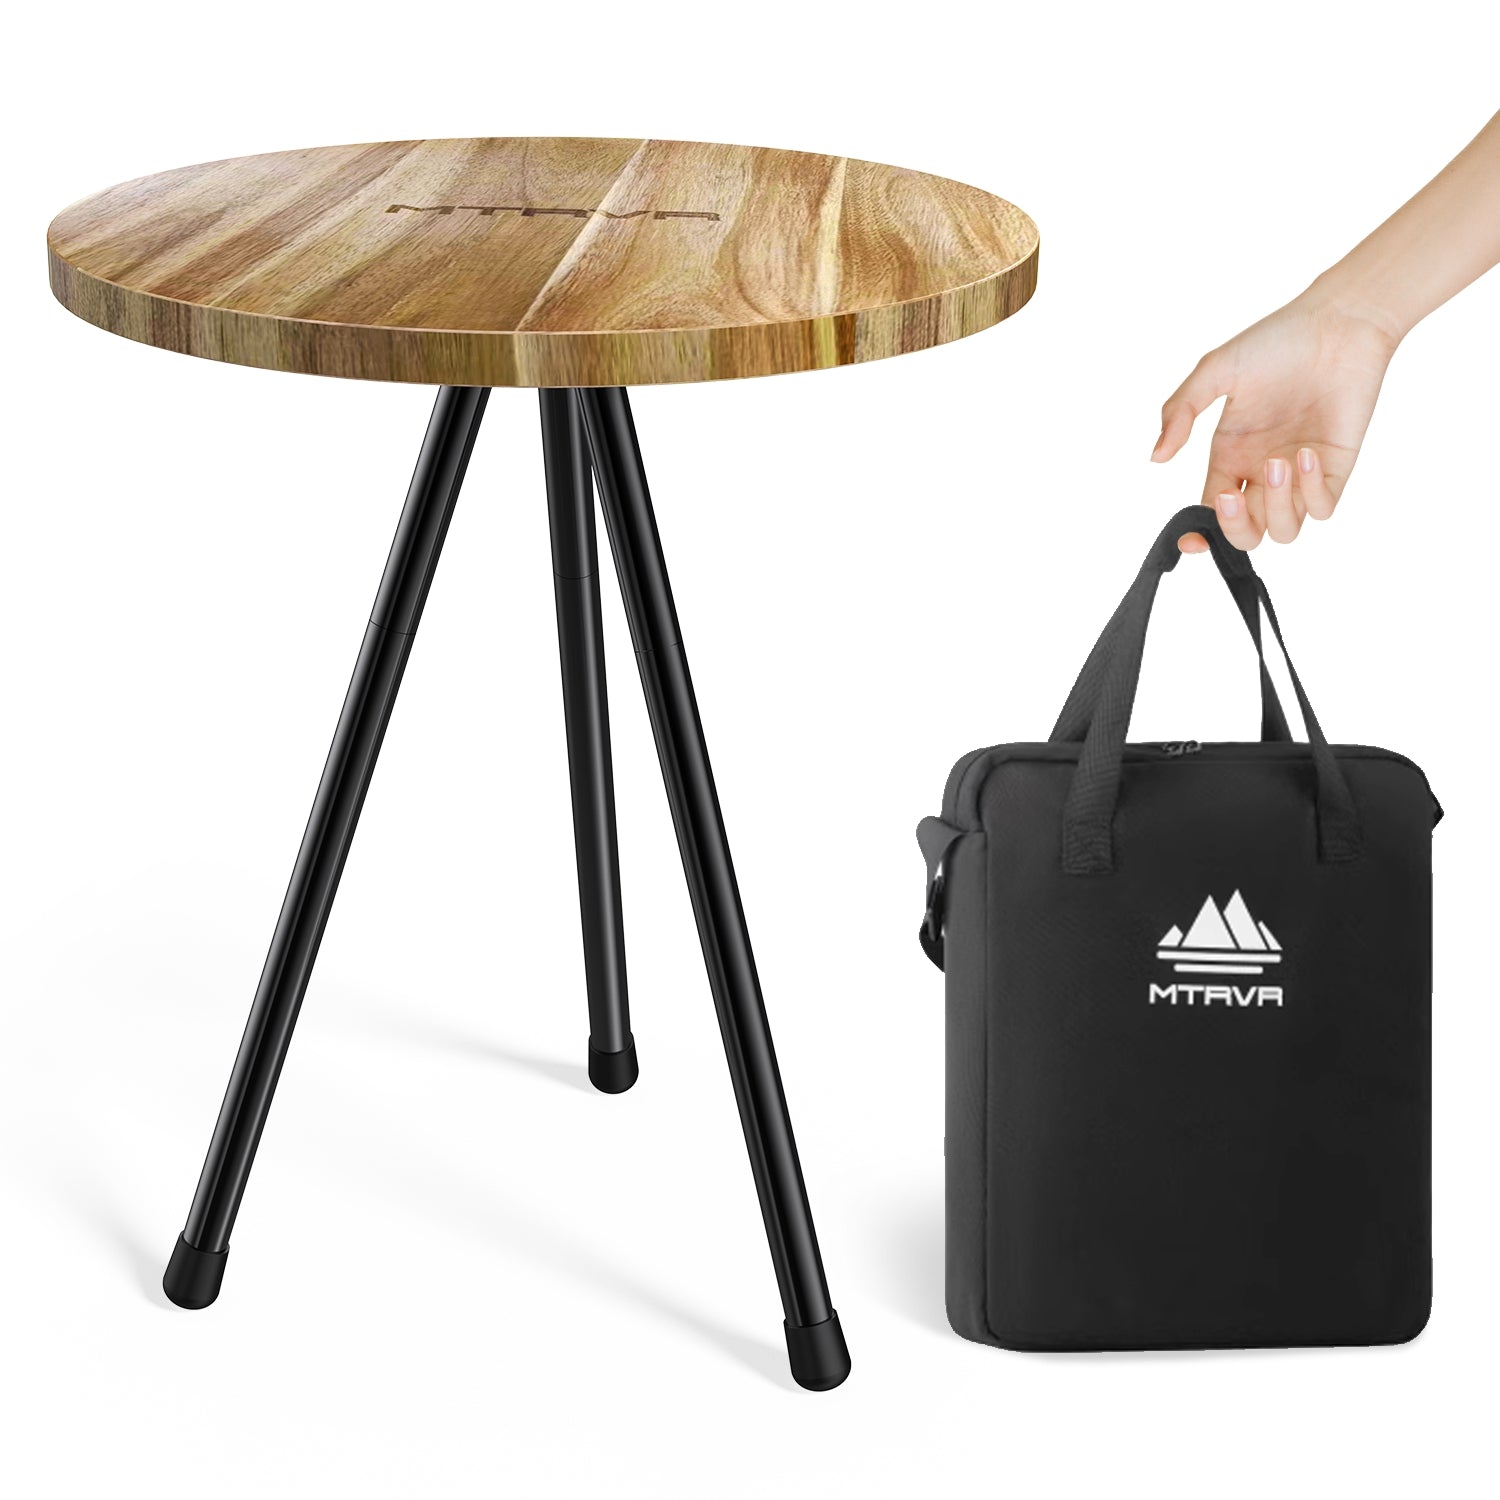 MTRVR Wooden Picnic Table